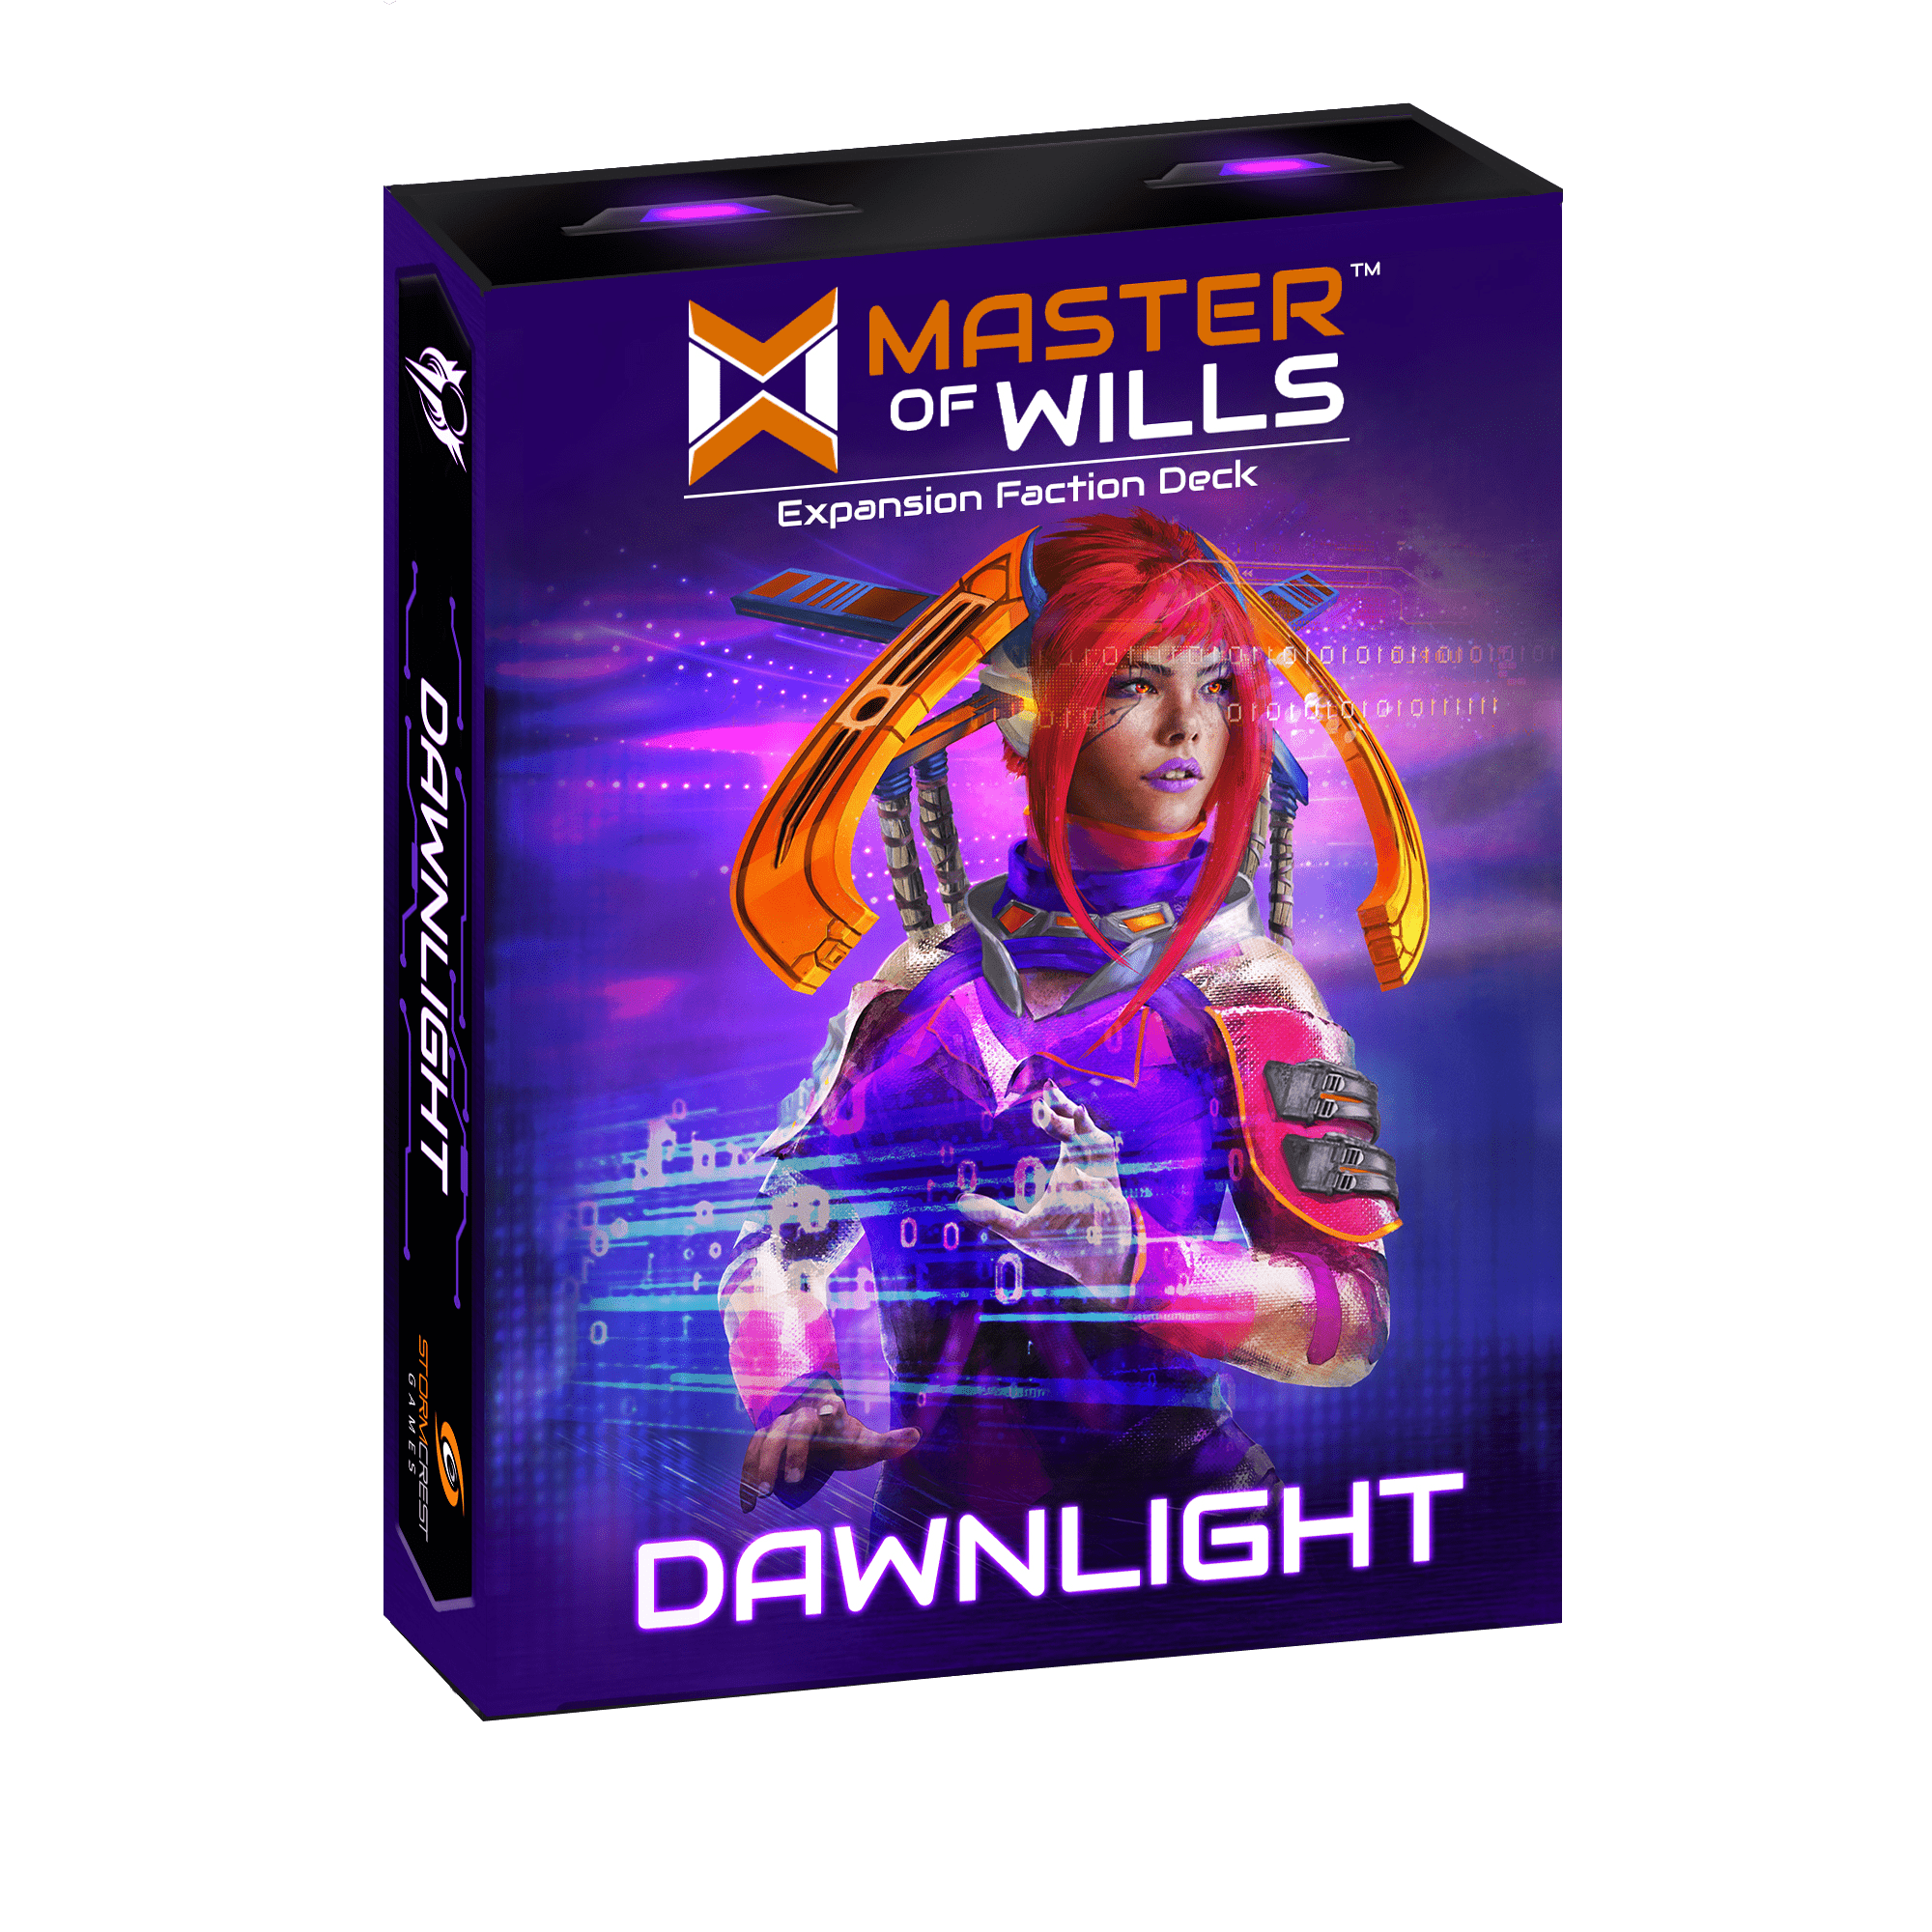 Masters of Wills: Dawnlight Expansion Faction Deck